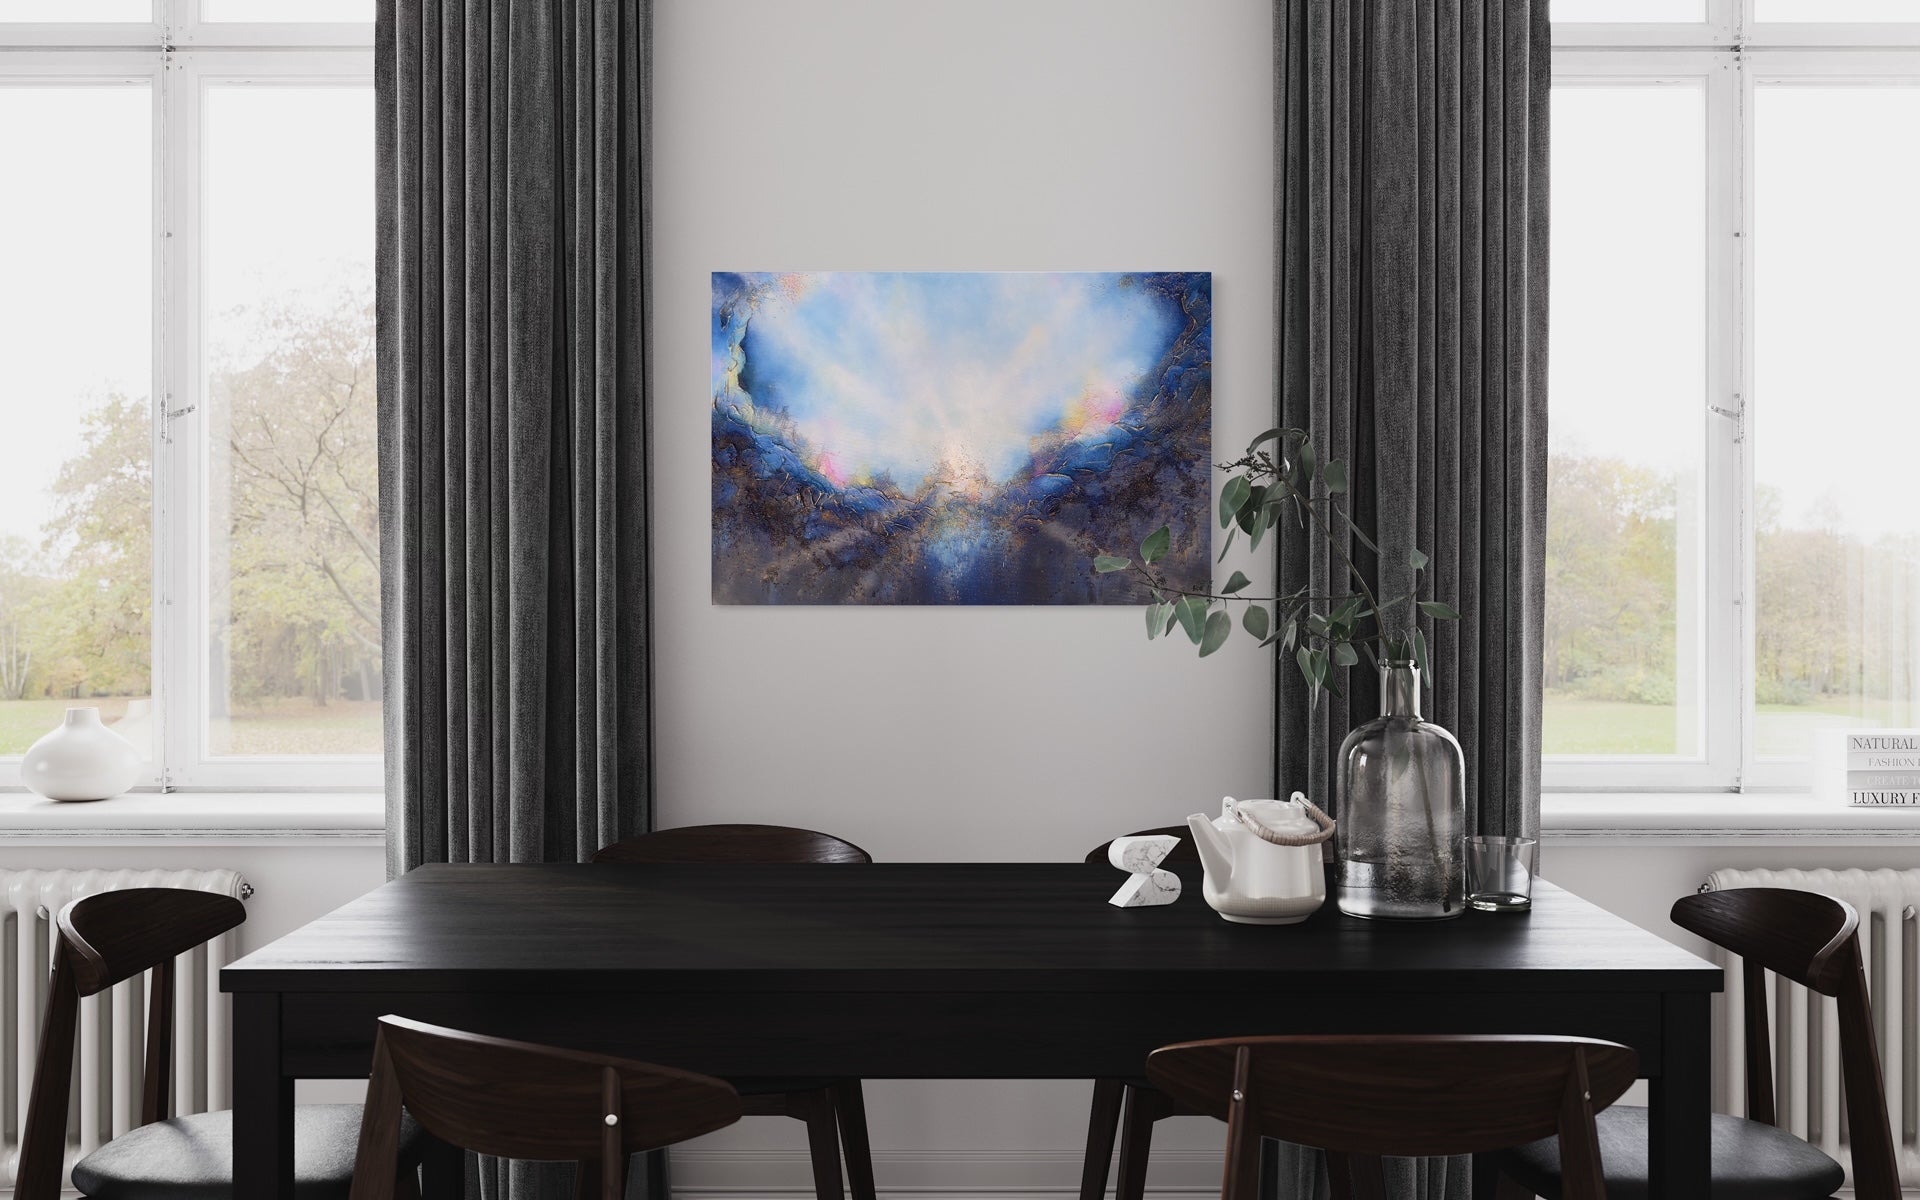 Soul's Return, hanging over a modern black table and chairs, with windows with floor length curtains on either side. a textured painting with light rays shining out from the center representing the soul's return to one's self, or the universe. Blue, pink, white, dark blue, textured painting. Ephemeral art, art with meaning, soul artist. Jennifer Tepper Fine Art.